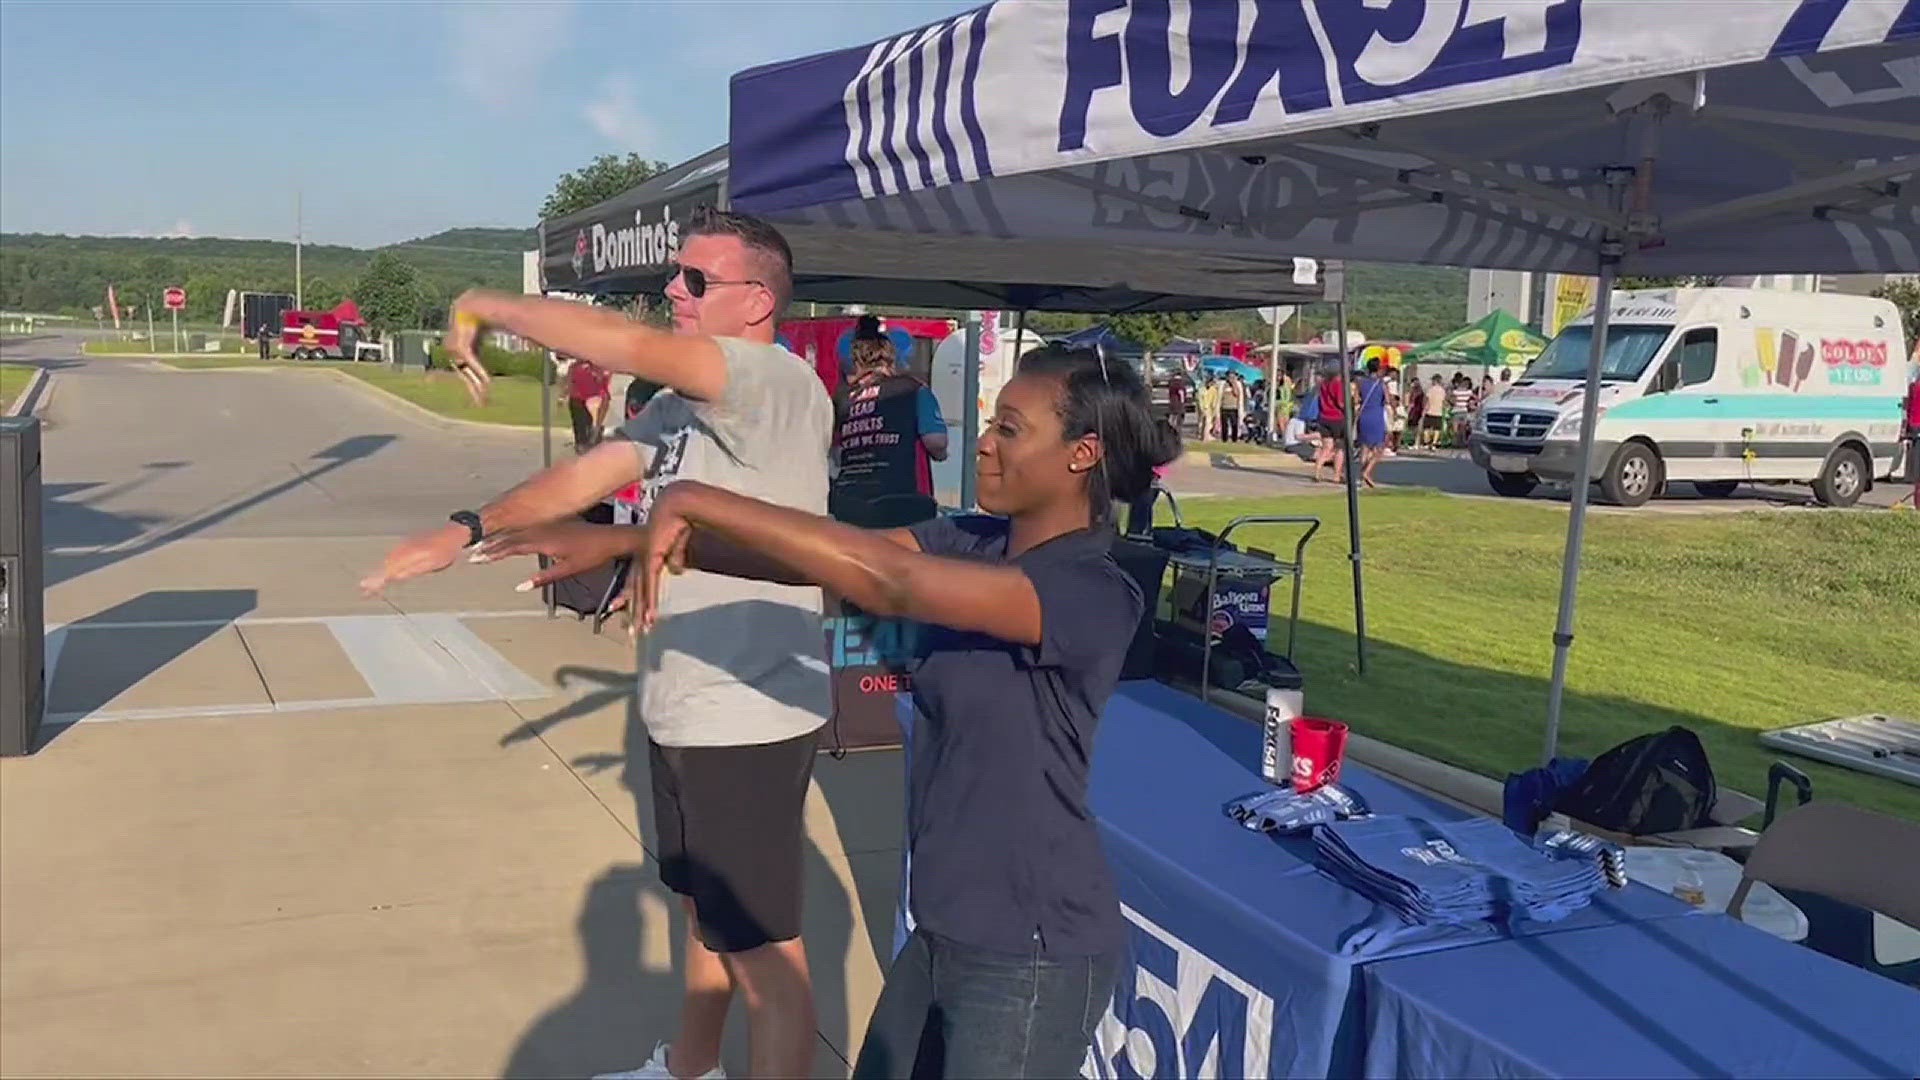 Team Redstone once again held a family-friendly party to celebrate the Army's birthday and FOX54, once again, was presenting sponsor!